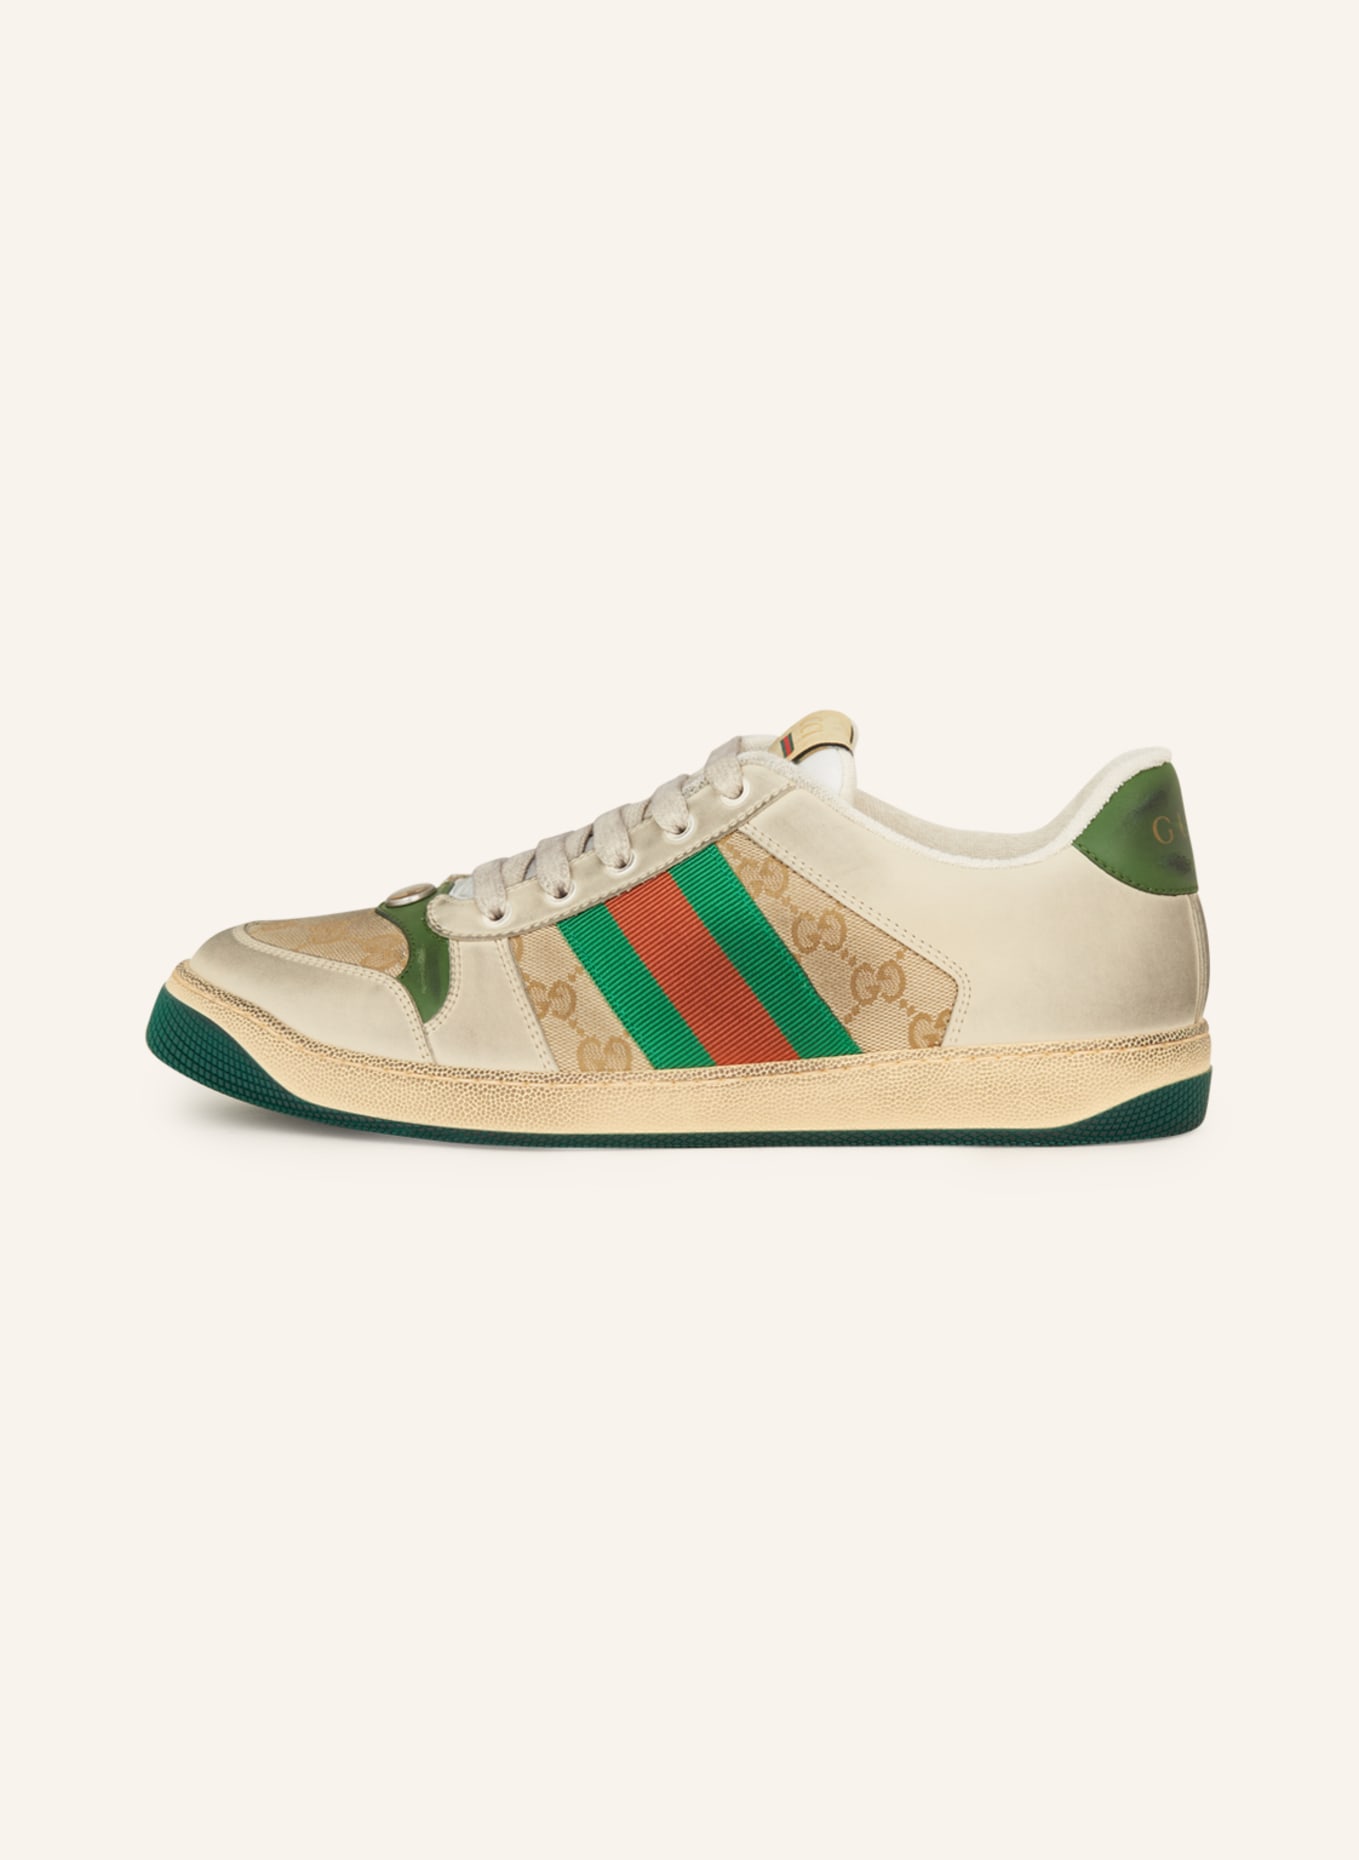 Gucci Is Selling $870 Sneakers That Purposely Look Dirty